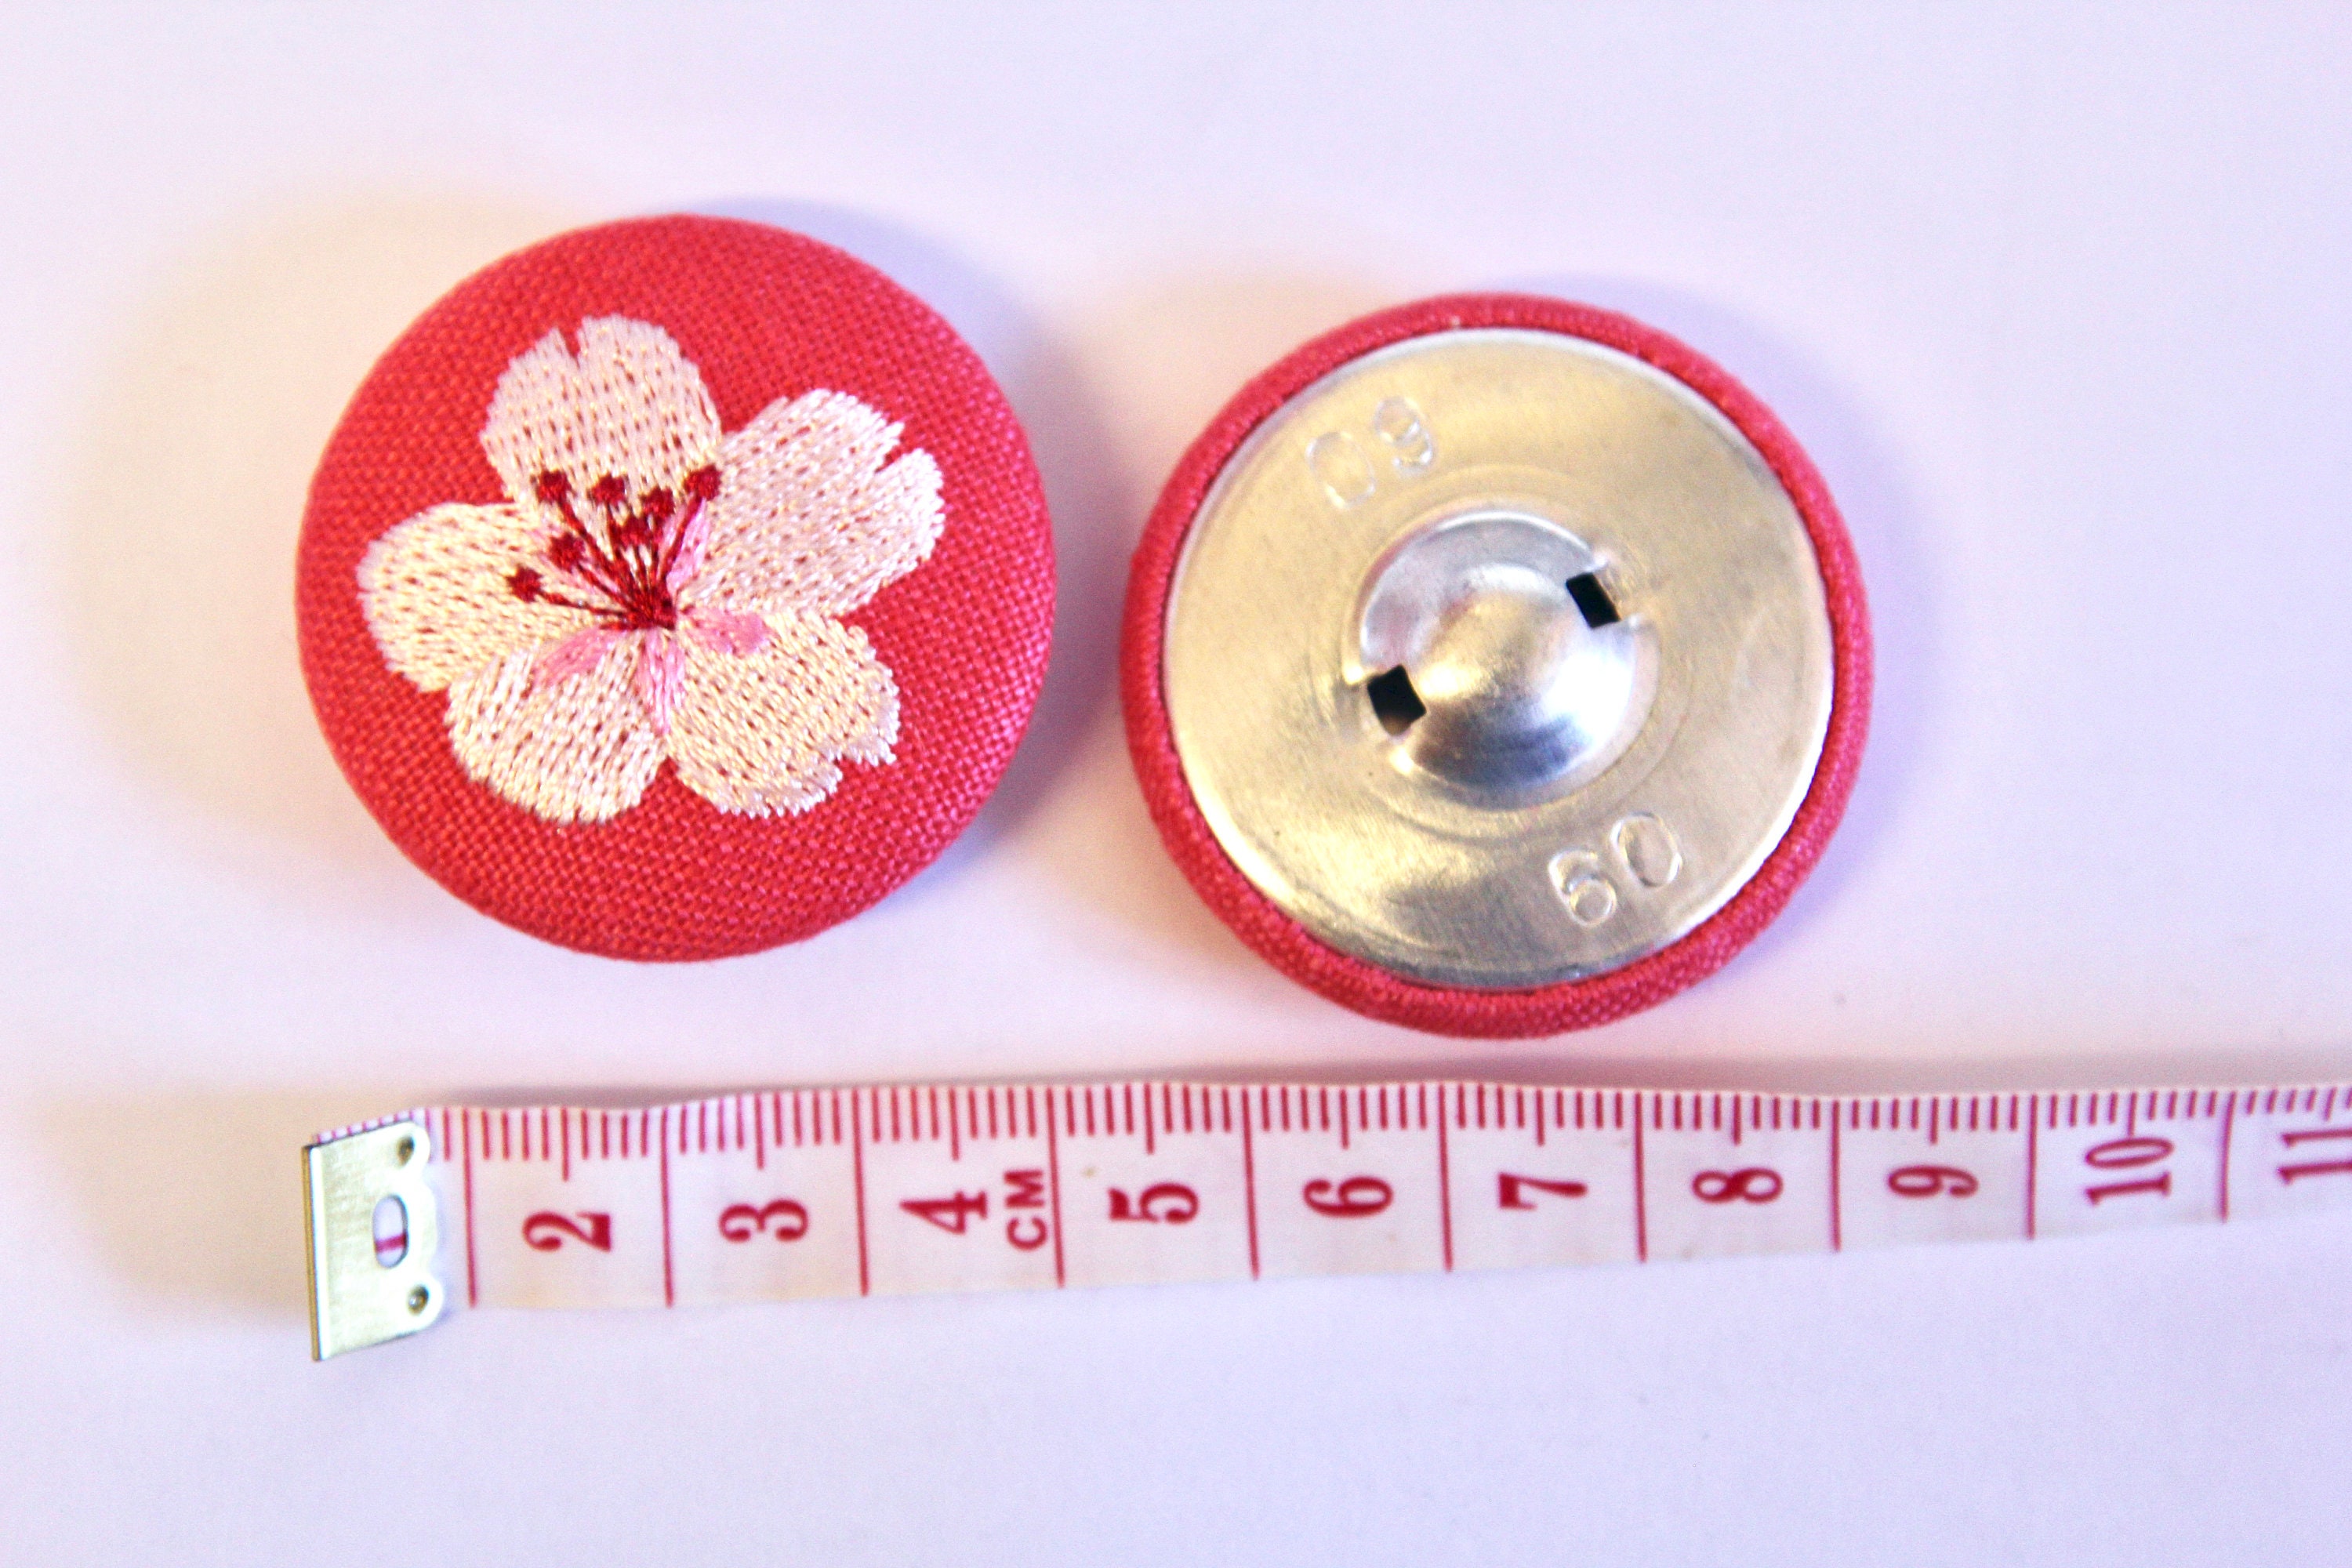 5set pink sew on button Fabric Covered snap Buttons wrapped Flat Back button